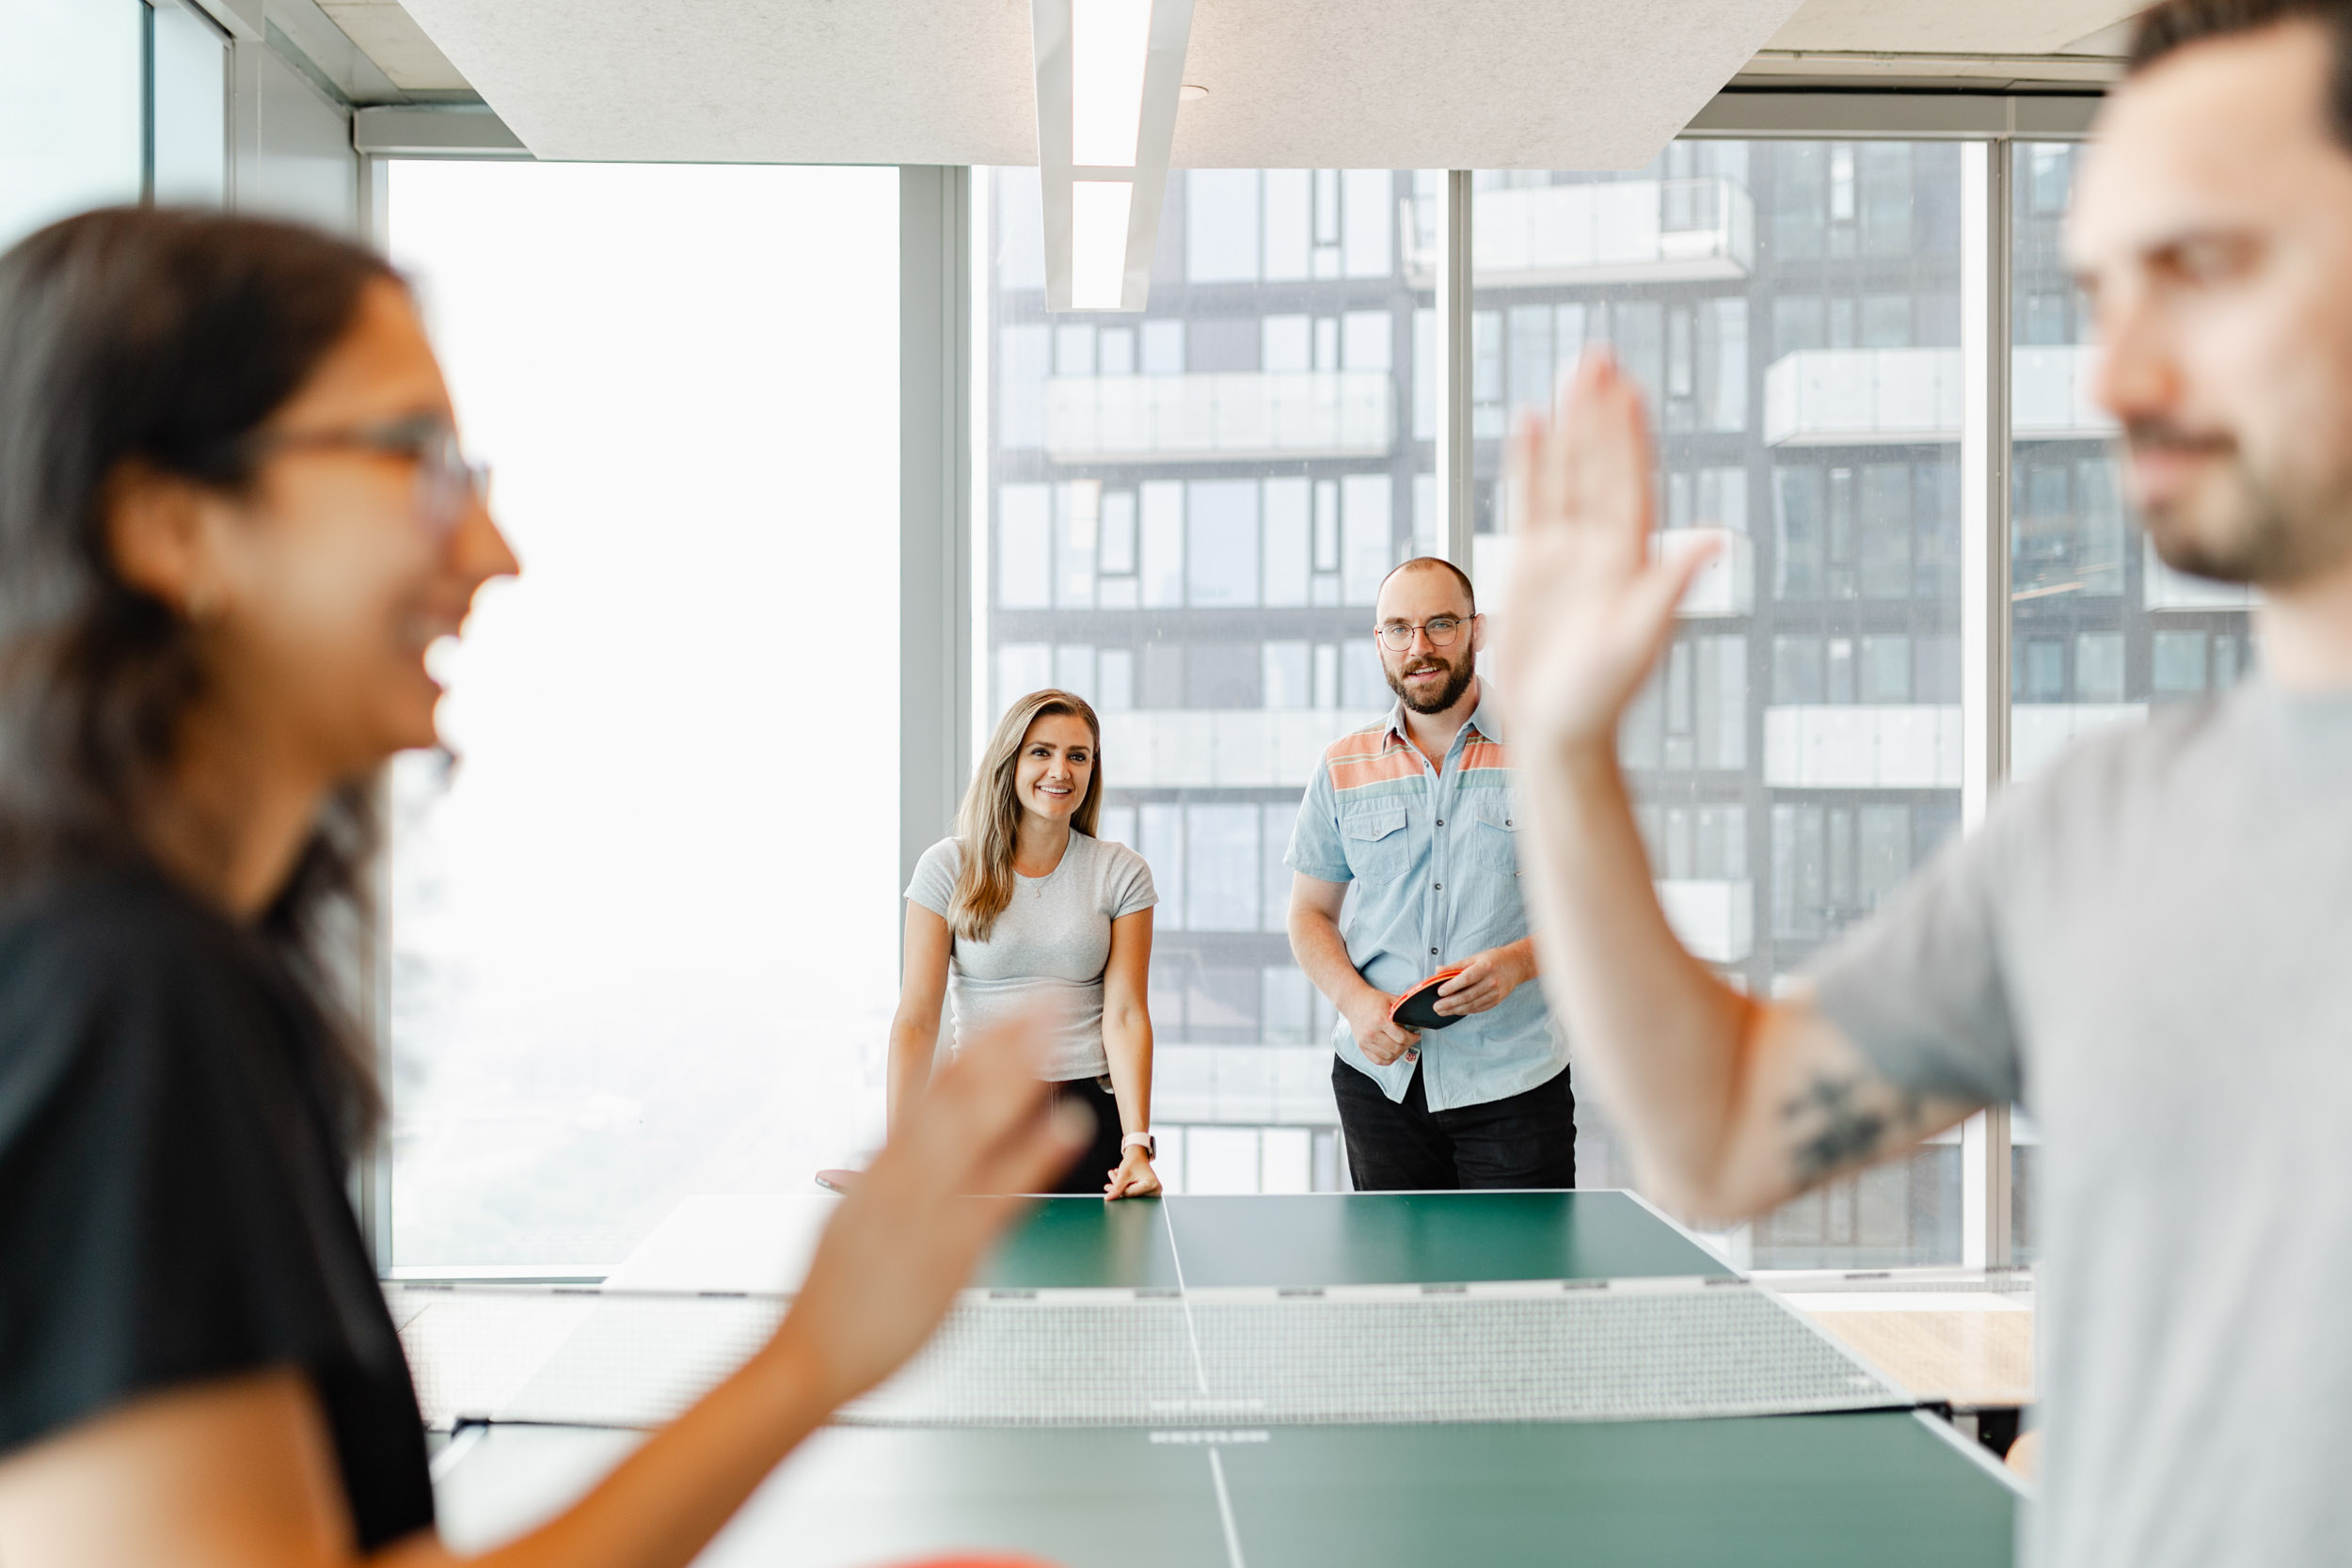 A group of people playing ping pong in the Index Exchange office.